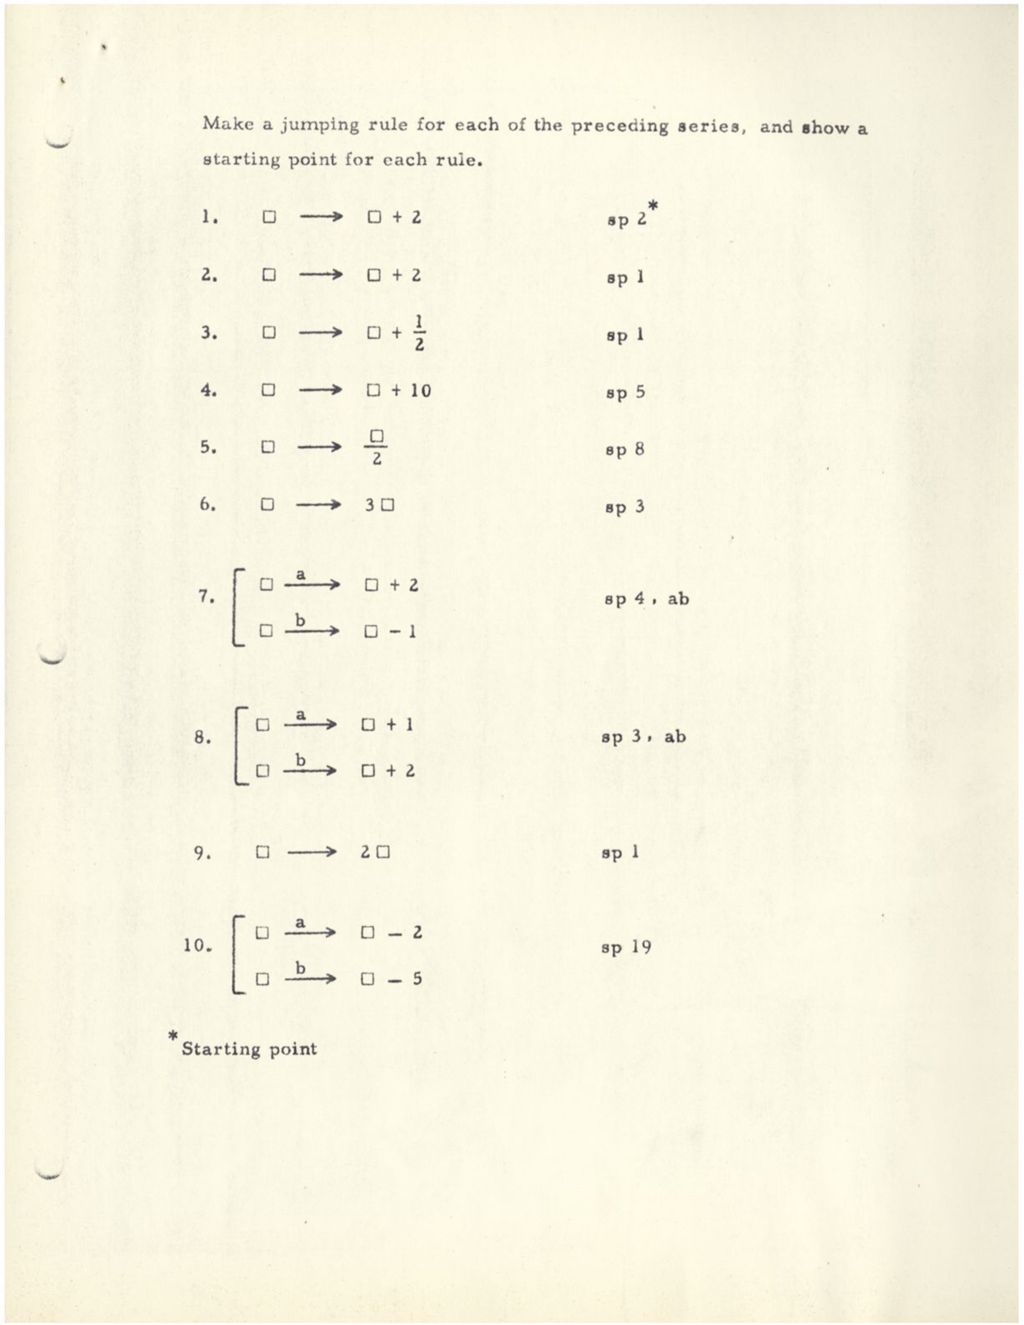 Miniature of Make a jumping rule for each of the preceding series